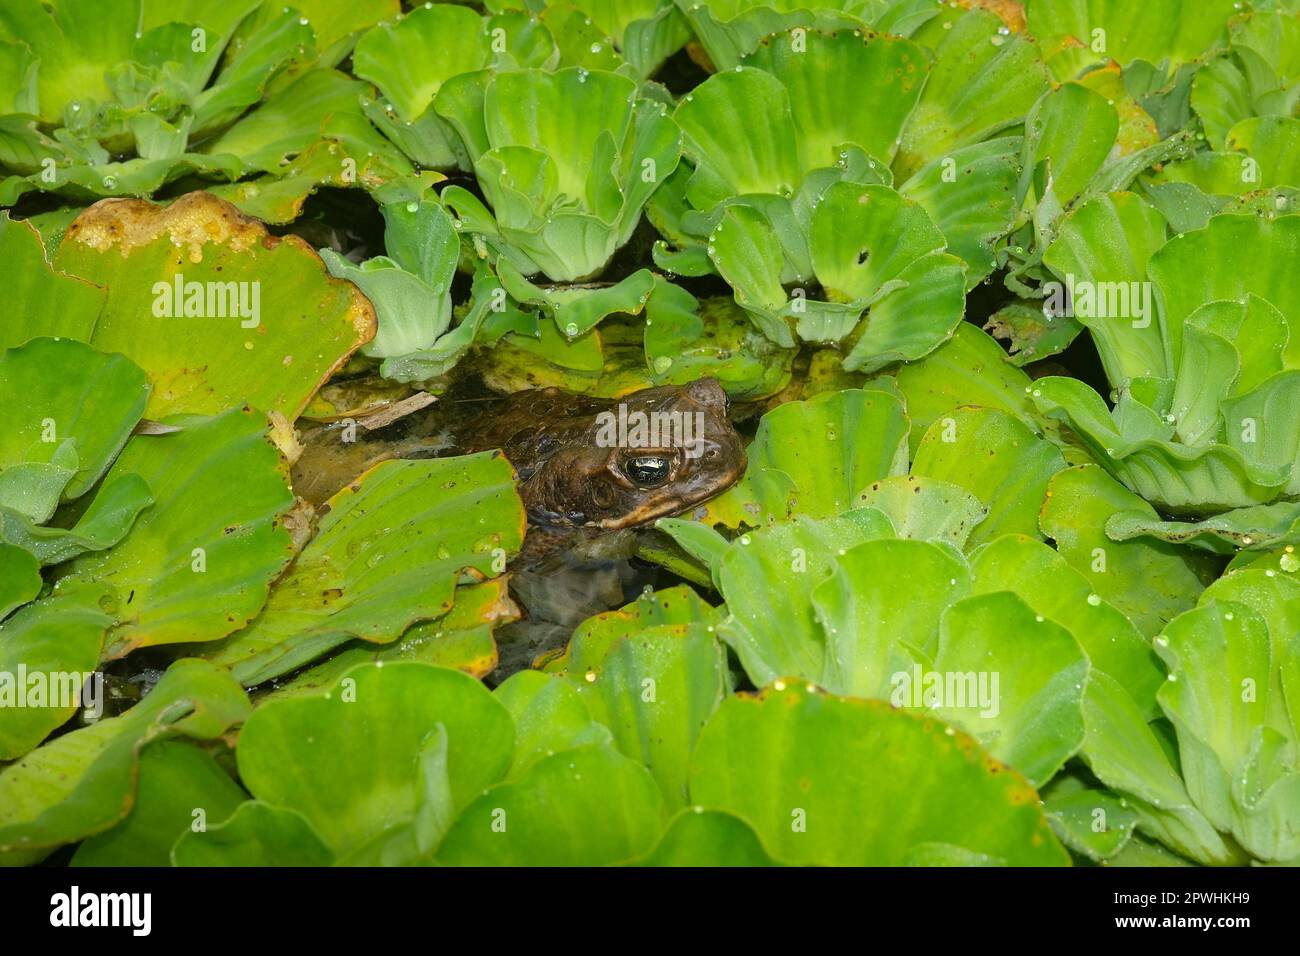 Cane toad, Rhinella marina, hidding among vegetation in a pond. Stock Photo